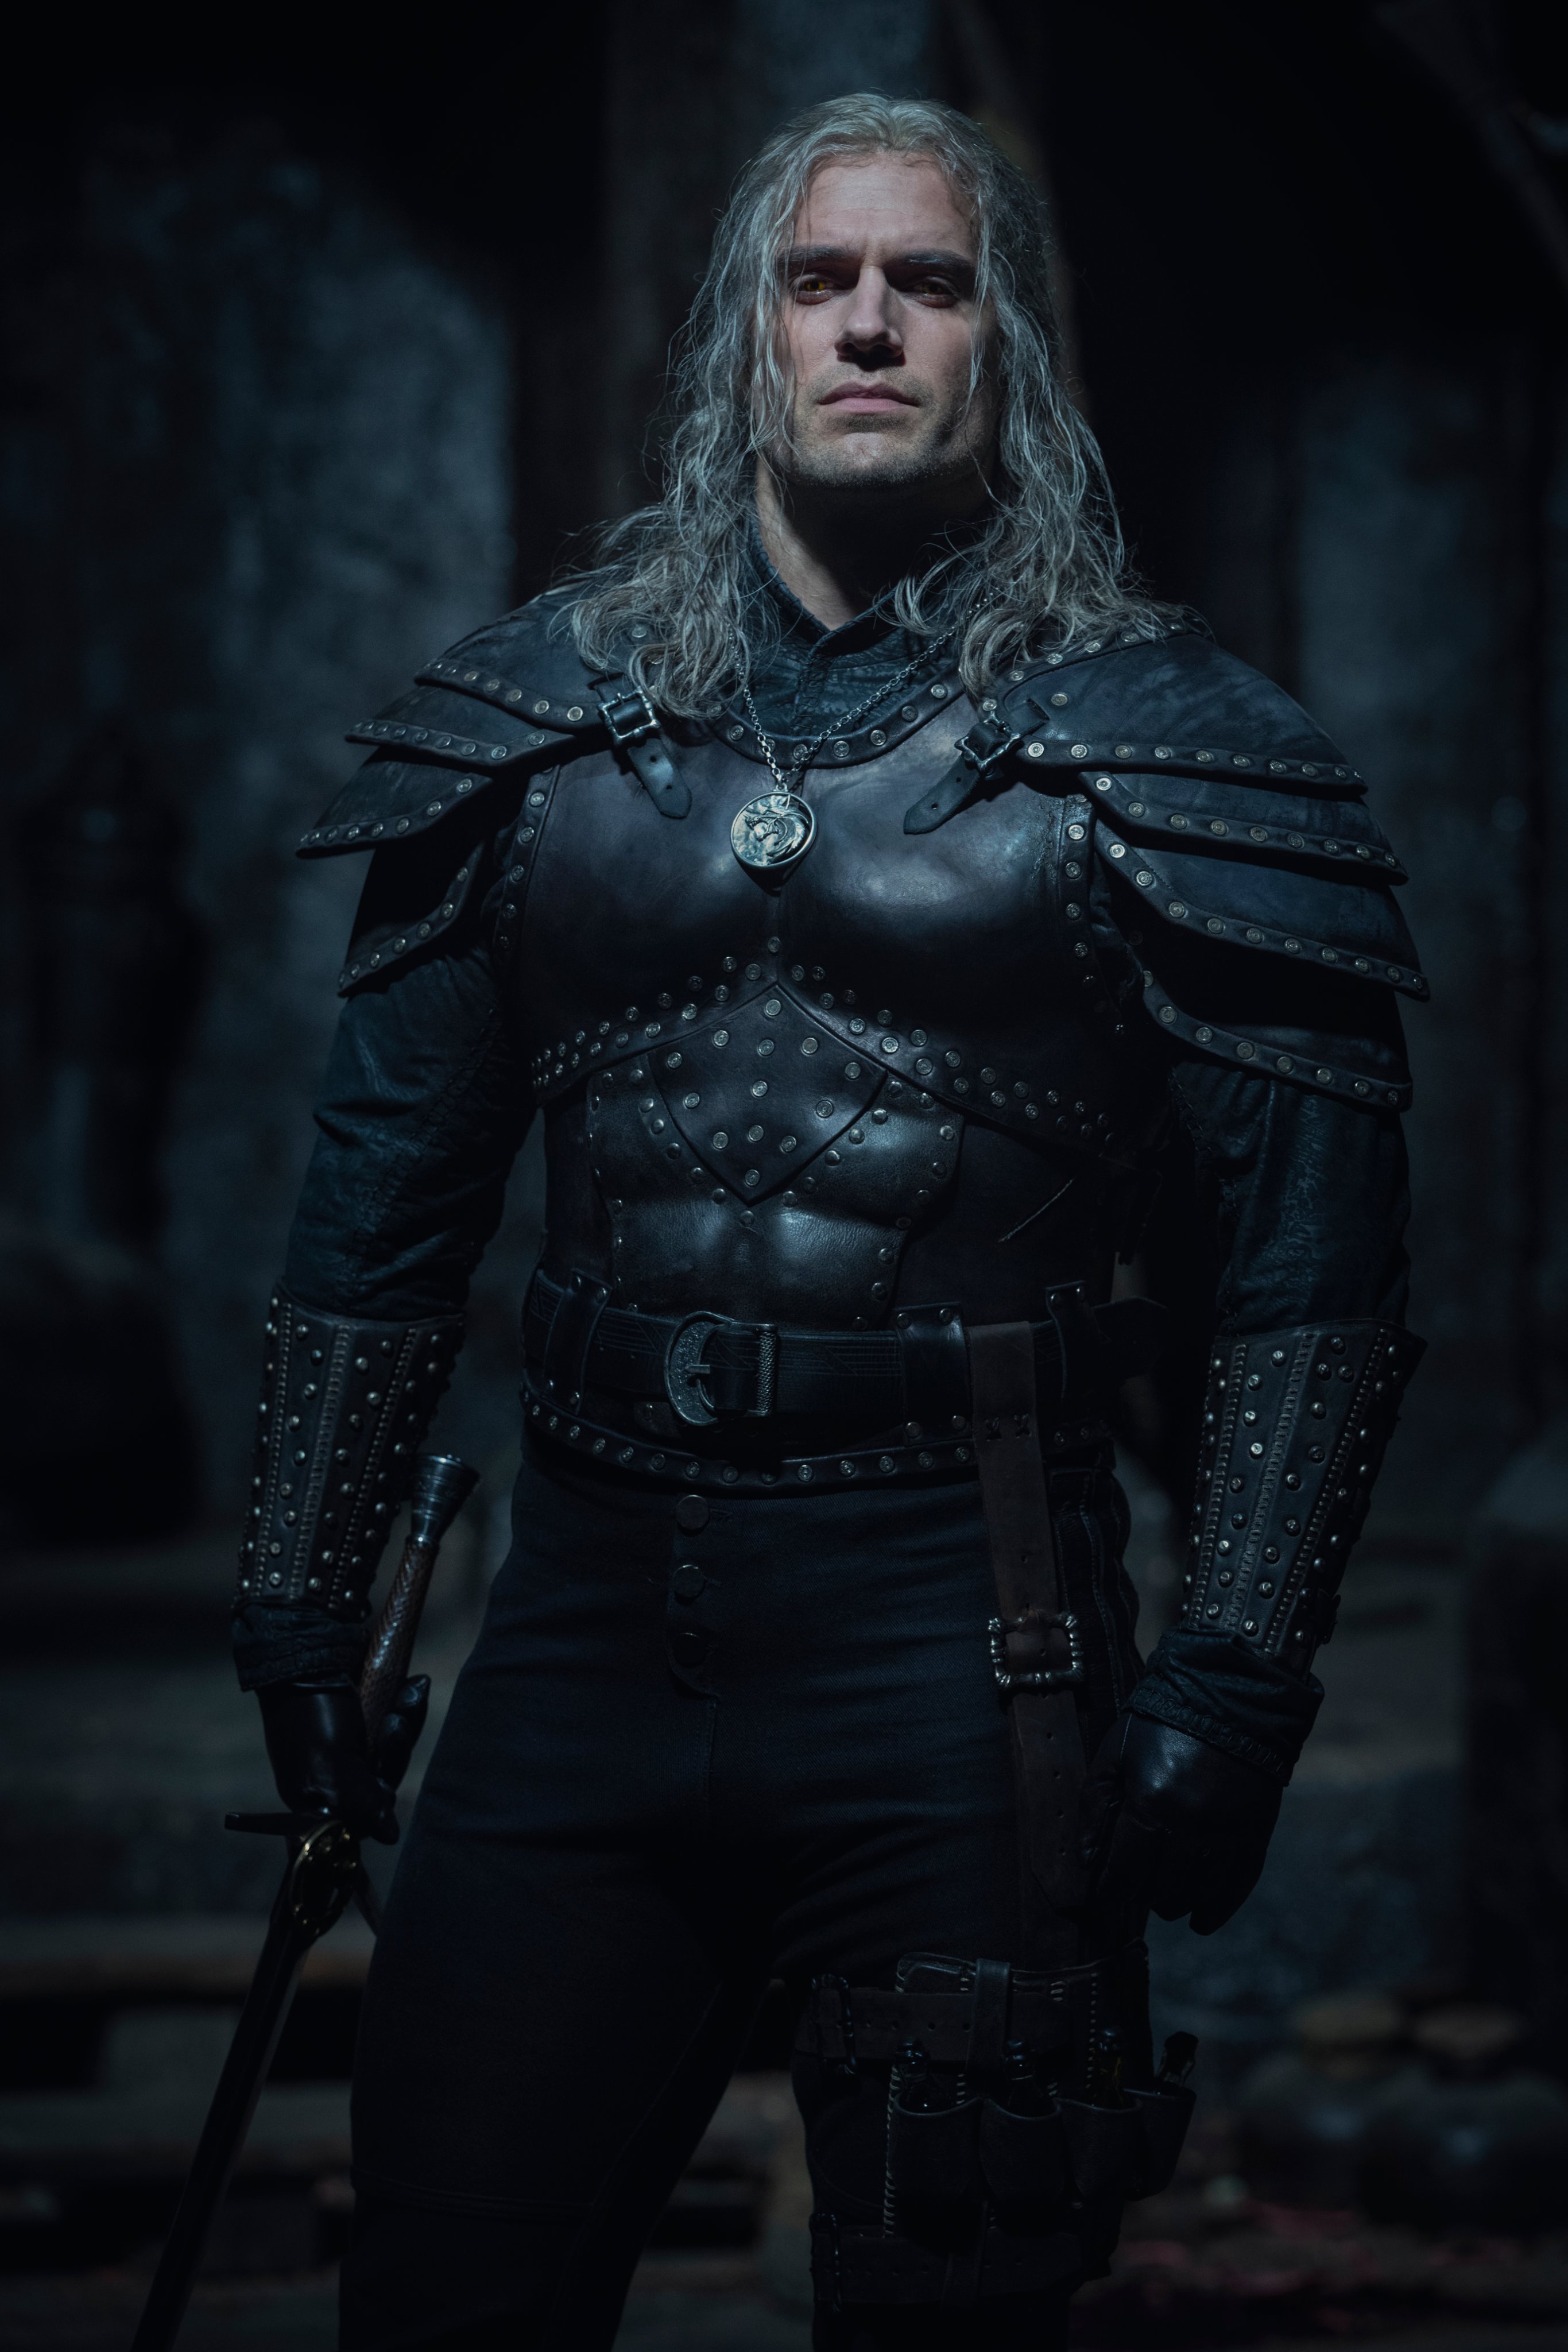 The Witcher (TV series), Witcher Wiki